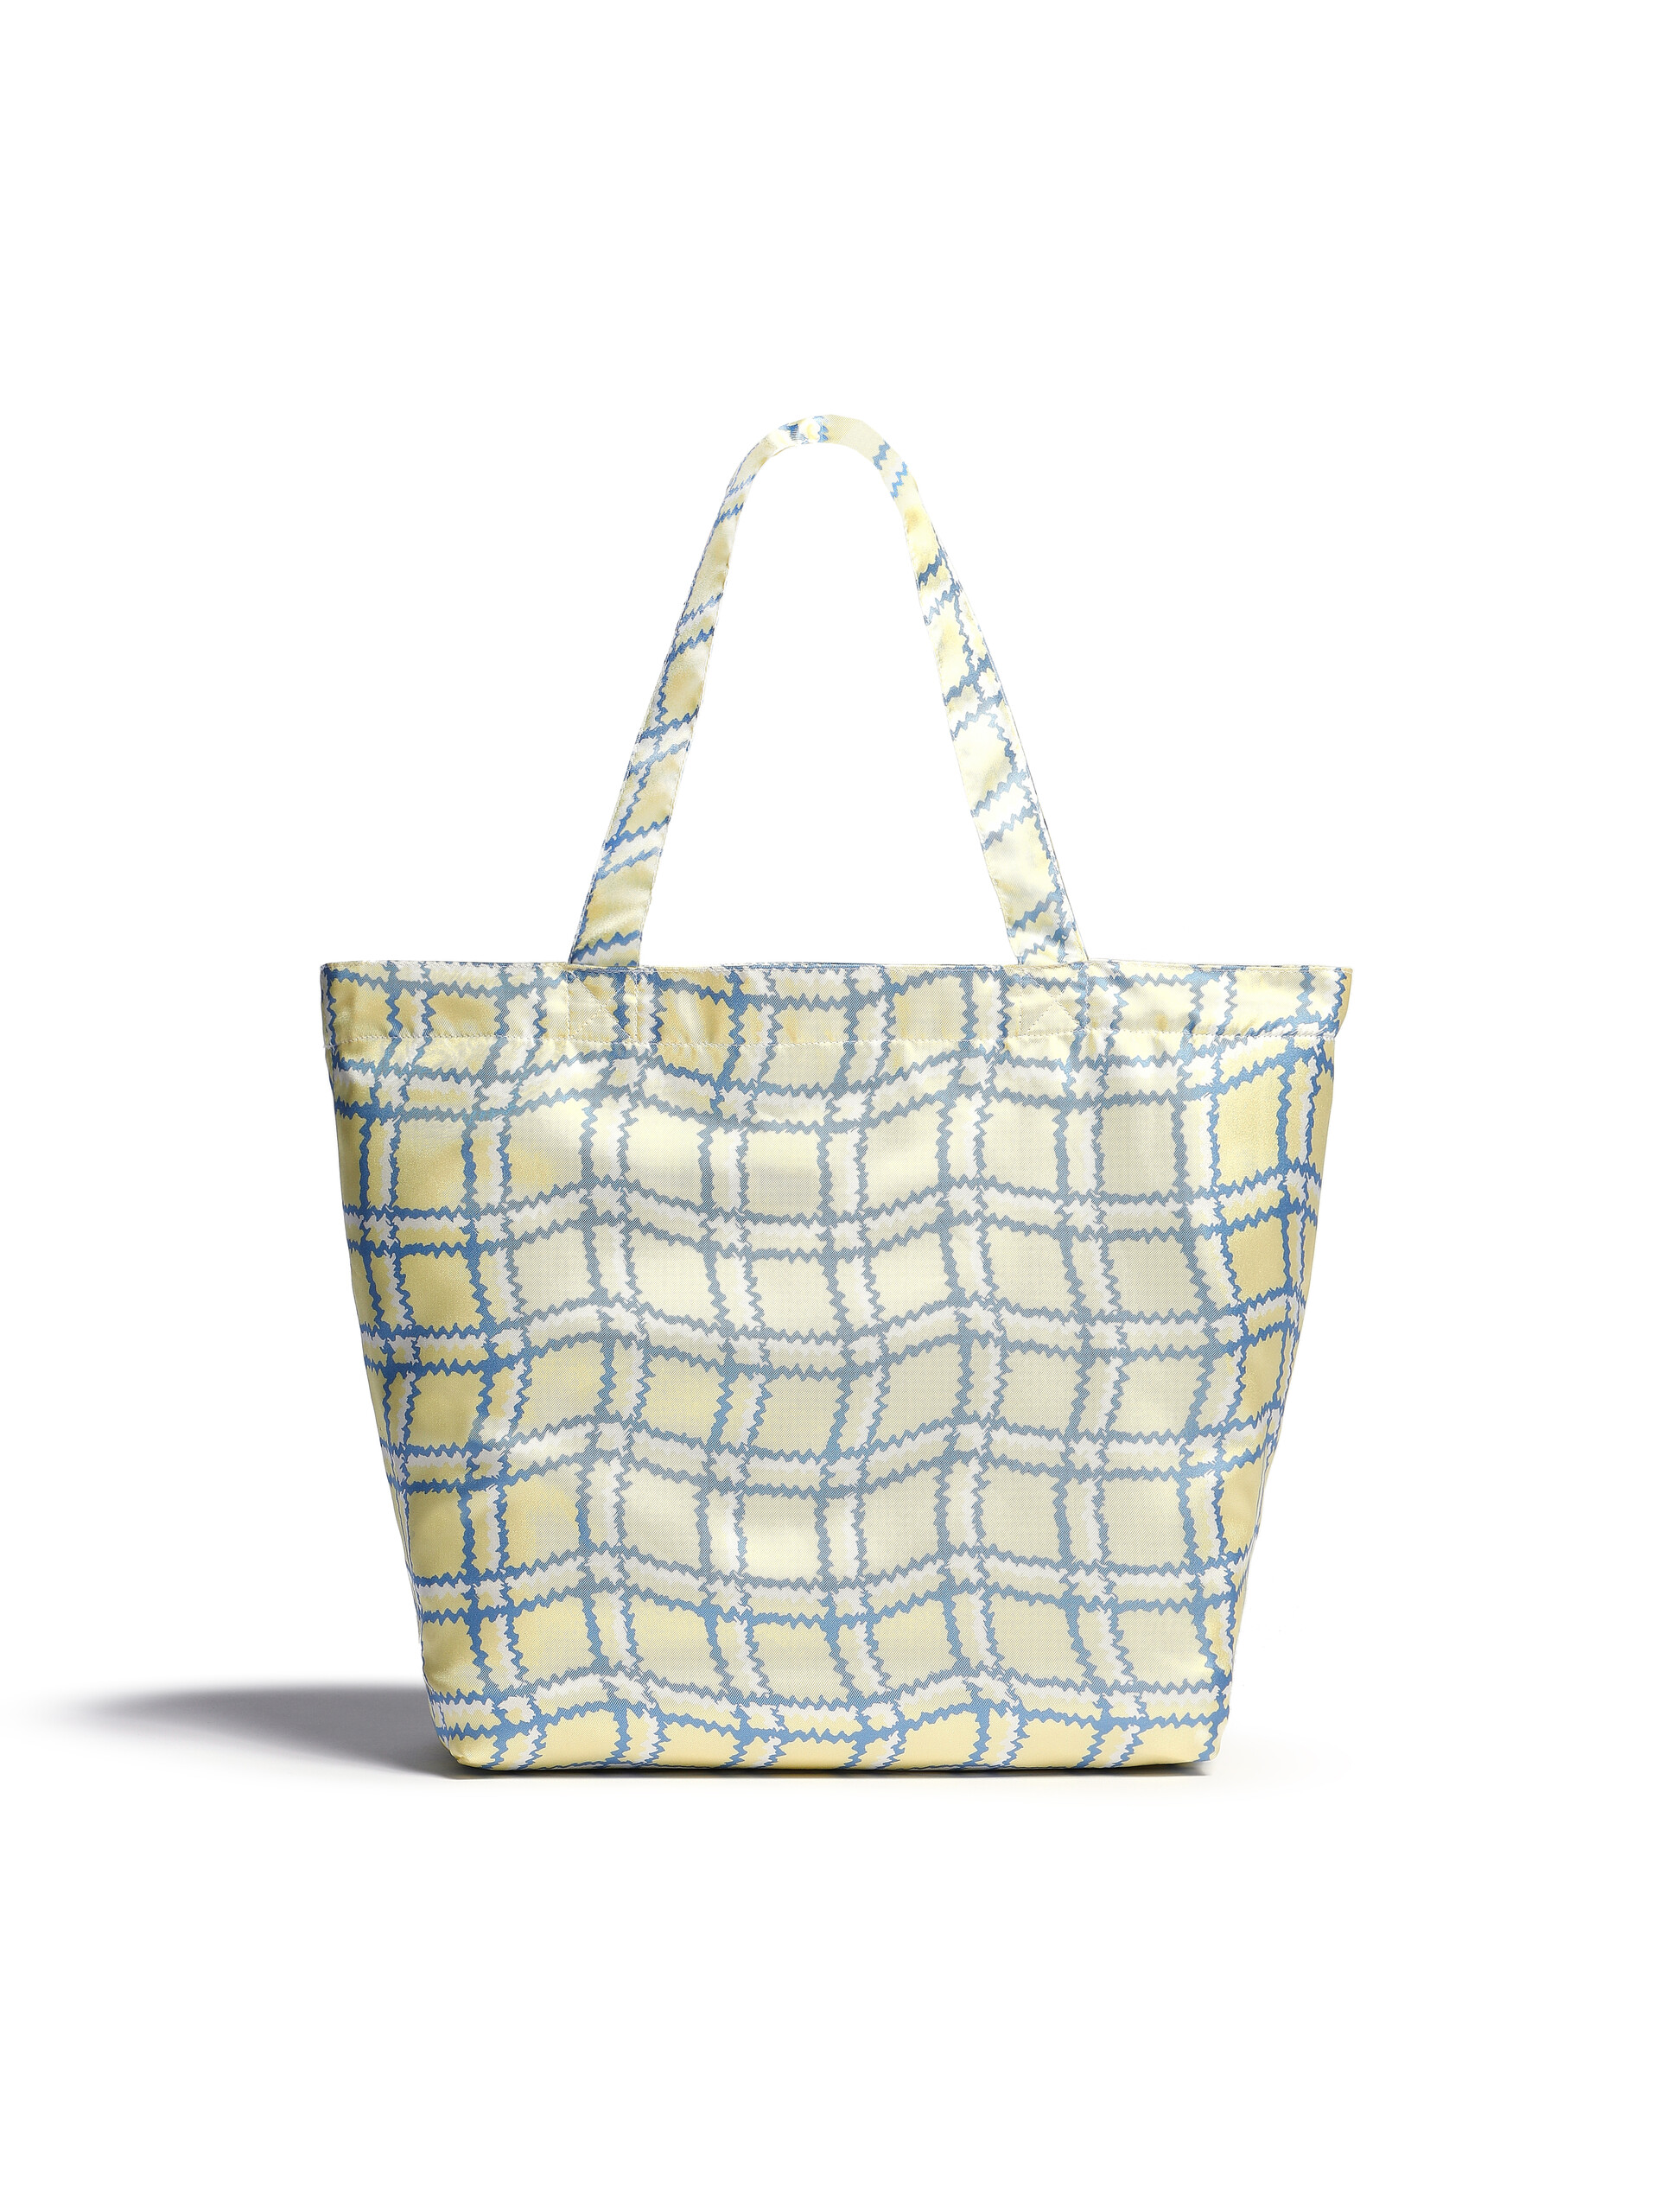 Yellow silk tote bag with archival check print - Shopping Bags - Image 3